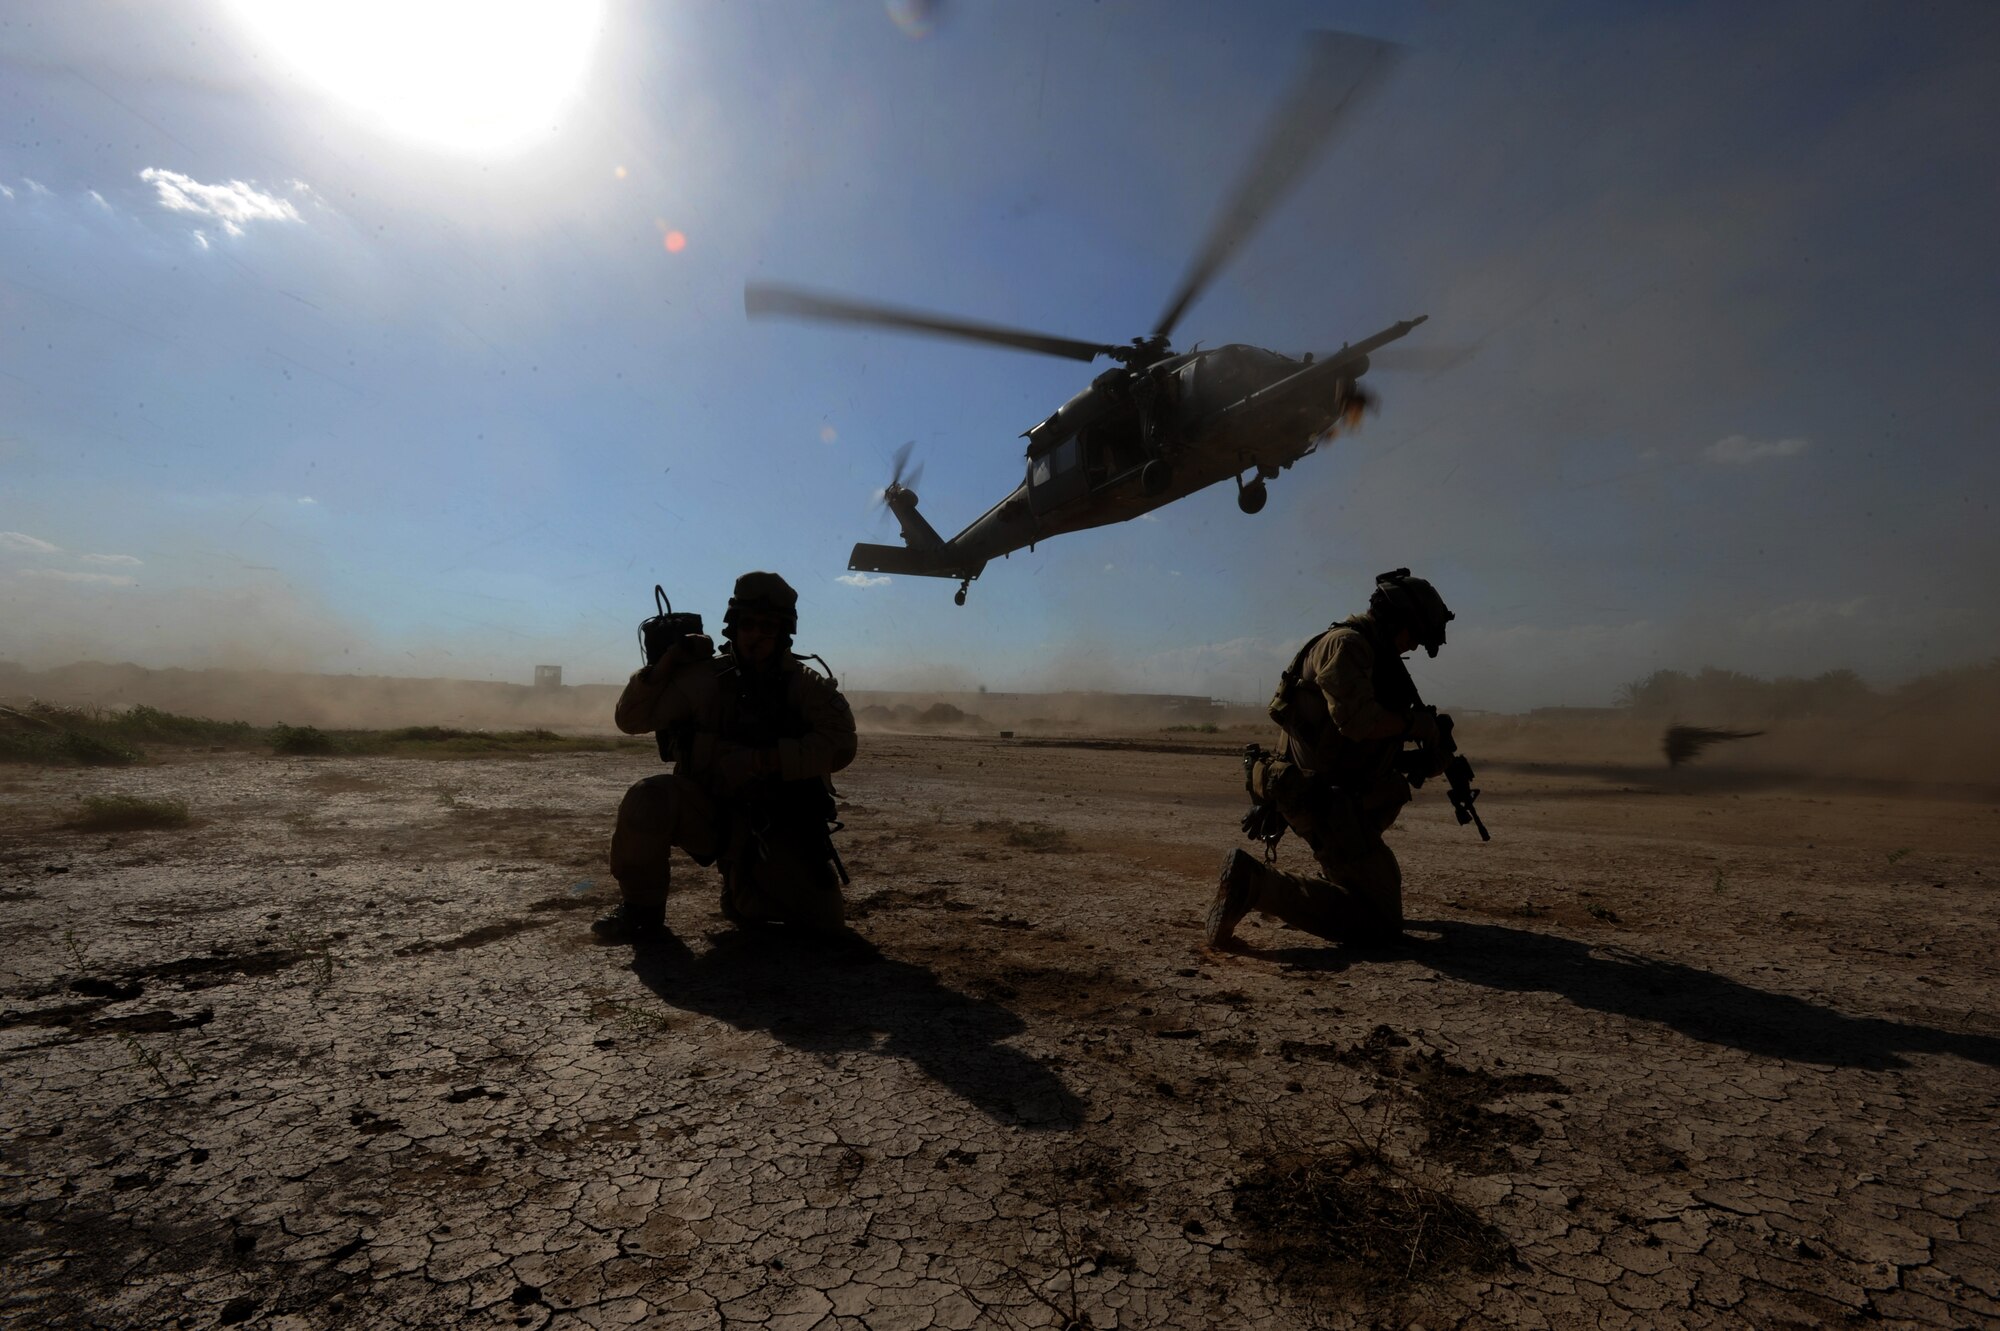 U.S. Air Force pararescuemen assigned to the 64th Expeditionary Rescue Squadron, Joint Base Balad, Iraq, prepare to board an HH-60 Pavehawk helicopter during proficiency training April 10, 2009, in support of Operation Iraqi Freedom.  (U.S. Air Force photo by Staff Sgt. James L. Harper Jr.)